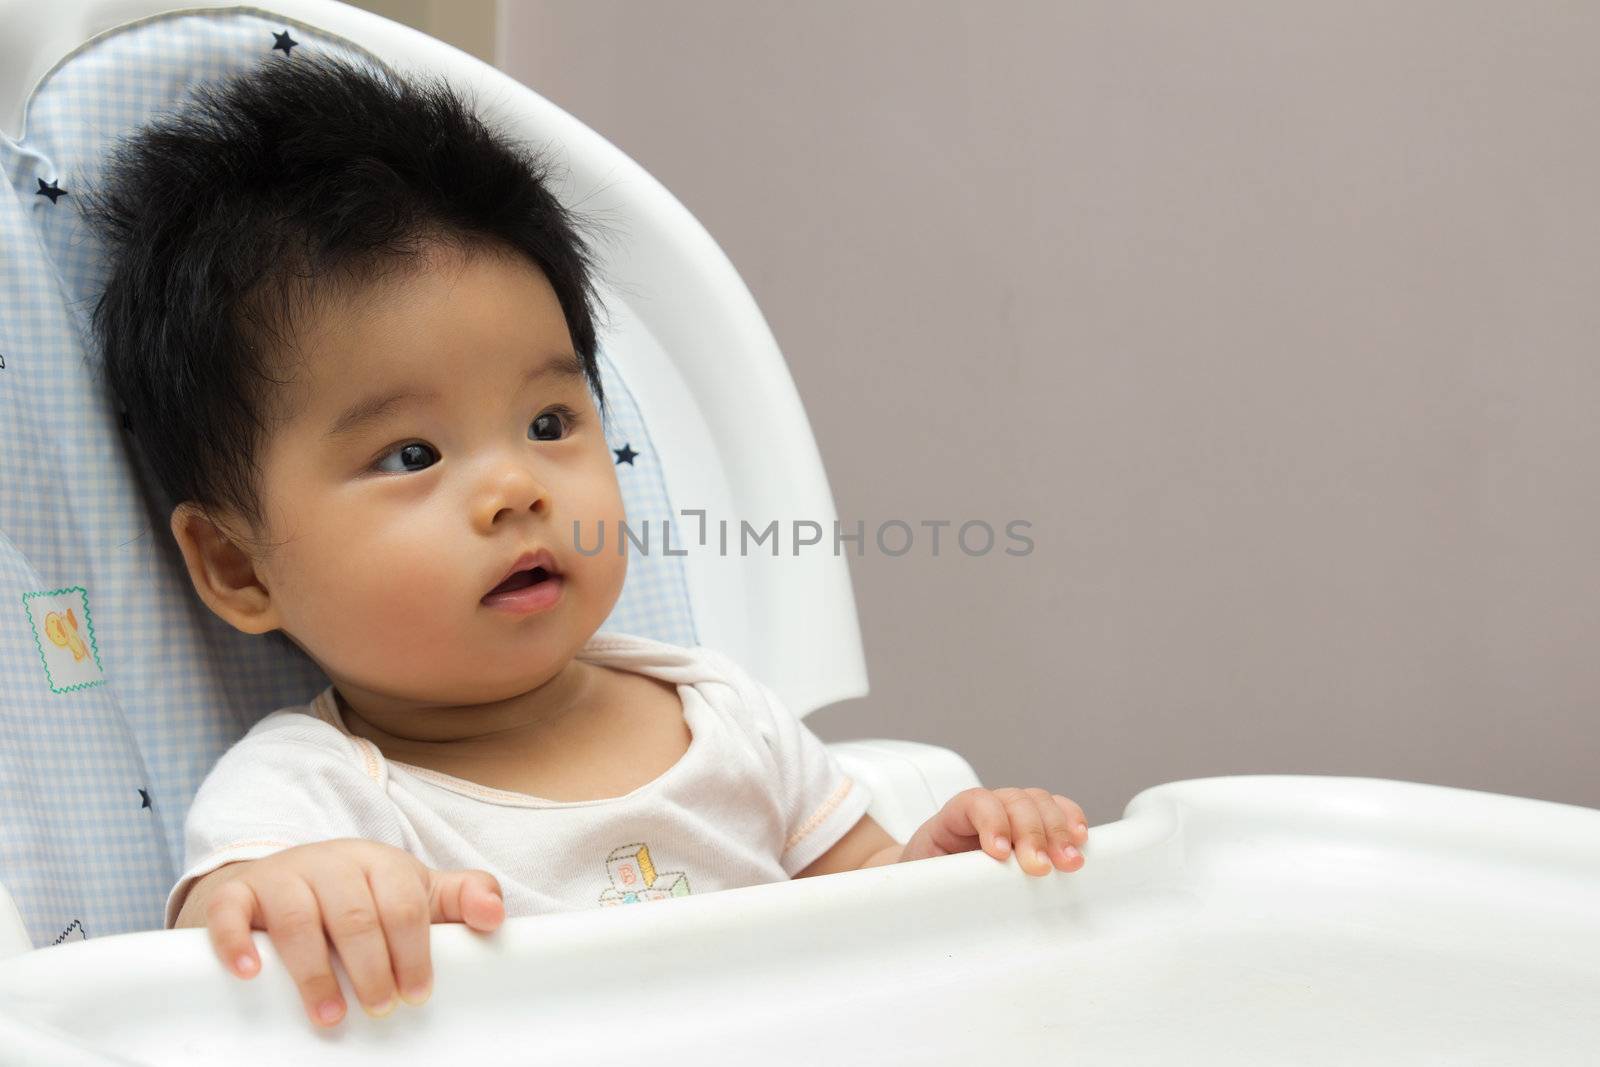 Portrait of a little Asian baby girl sits on a high chair